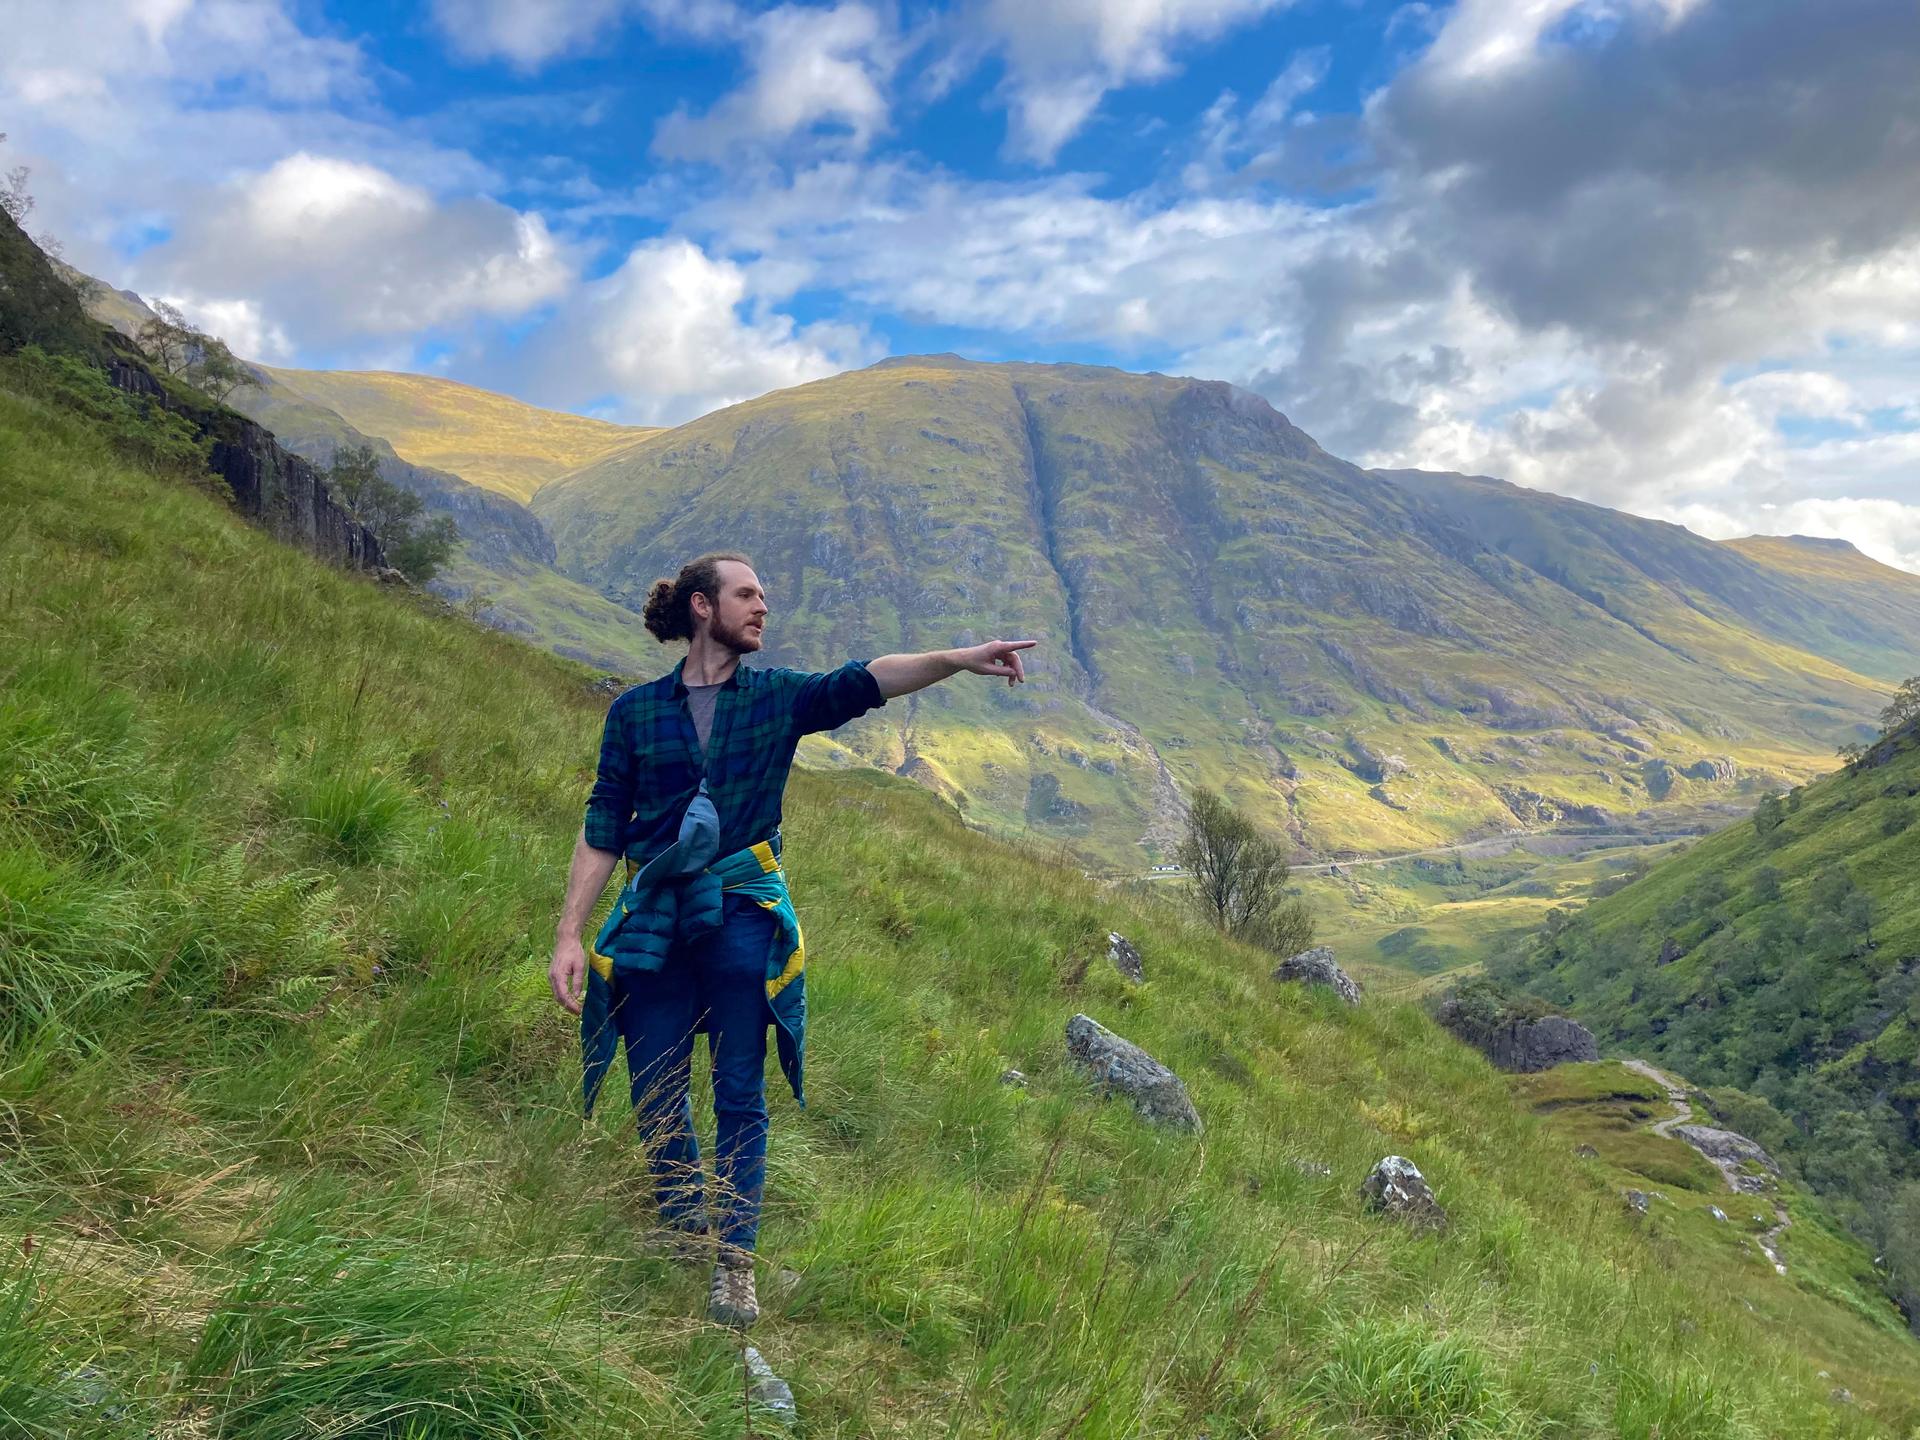 Me on a hike in Scotland